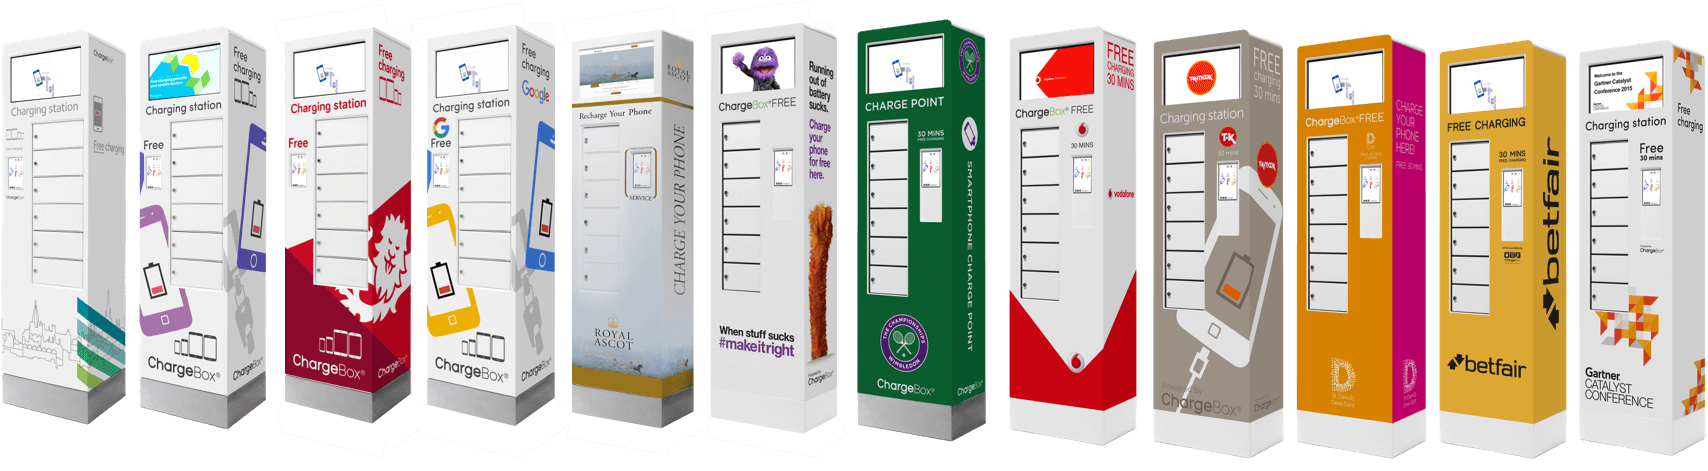 The range of charging stations ChargeBox offers